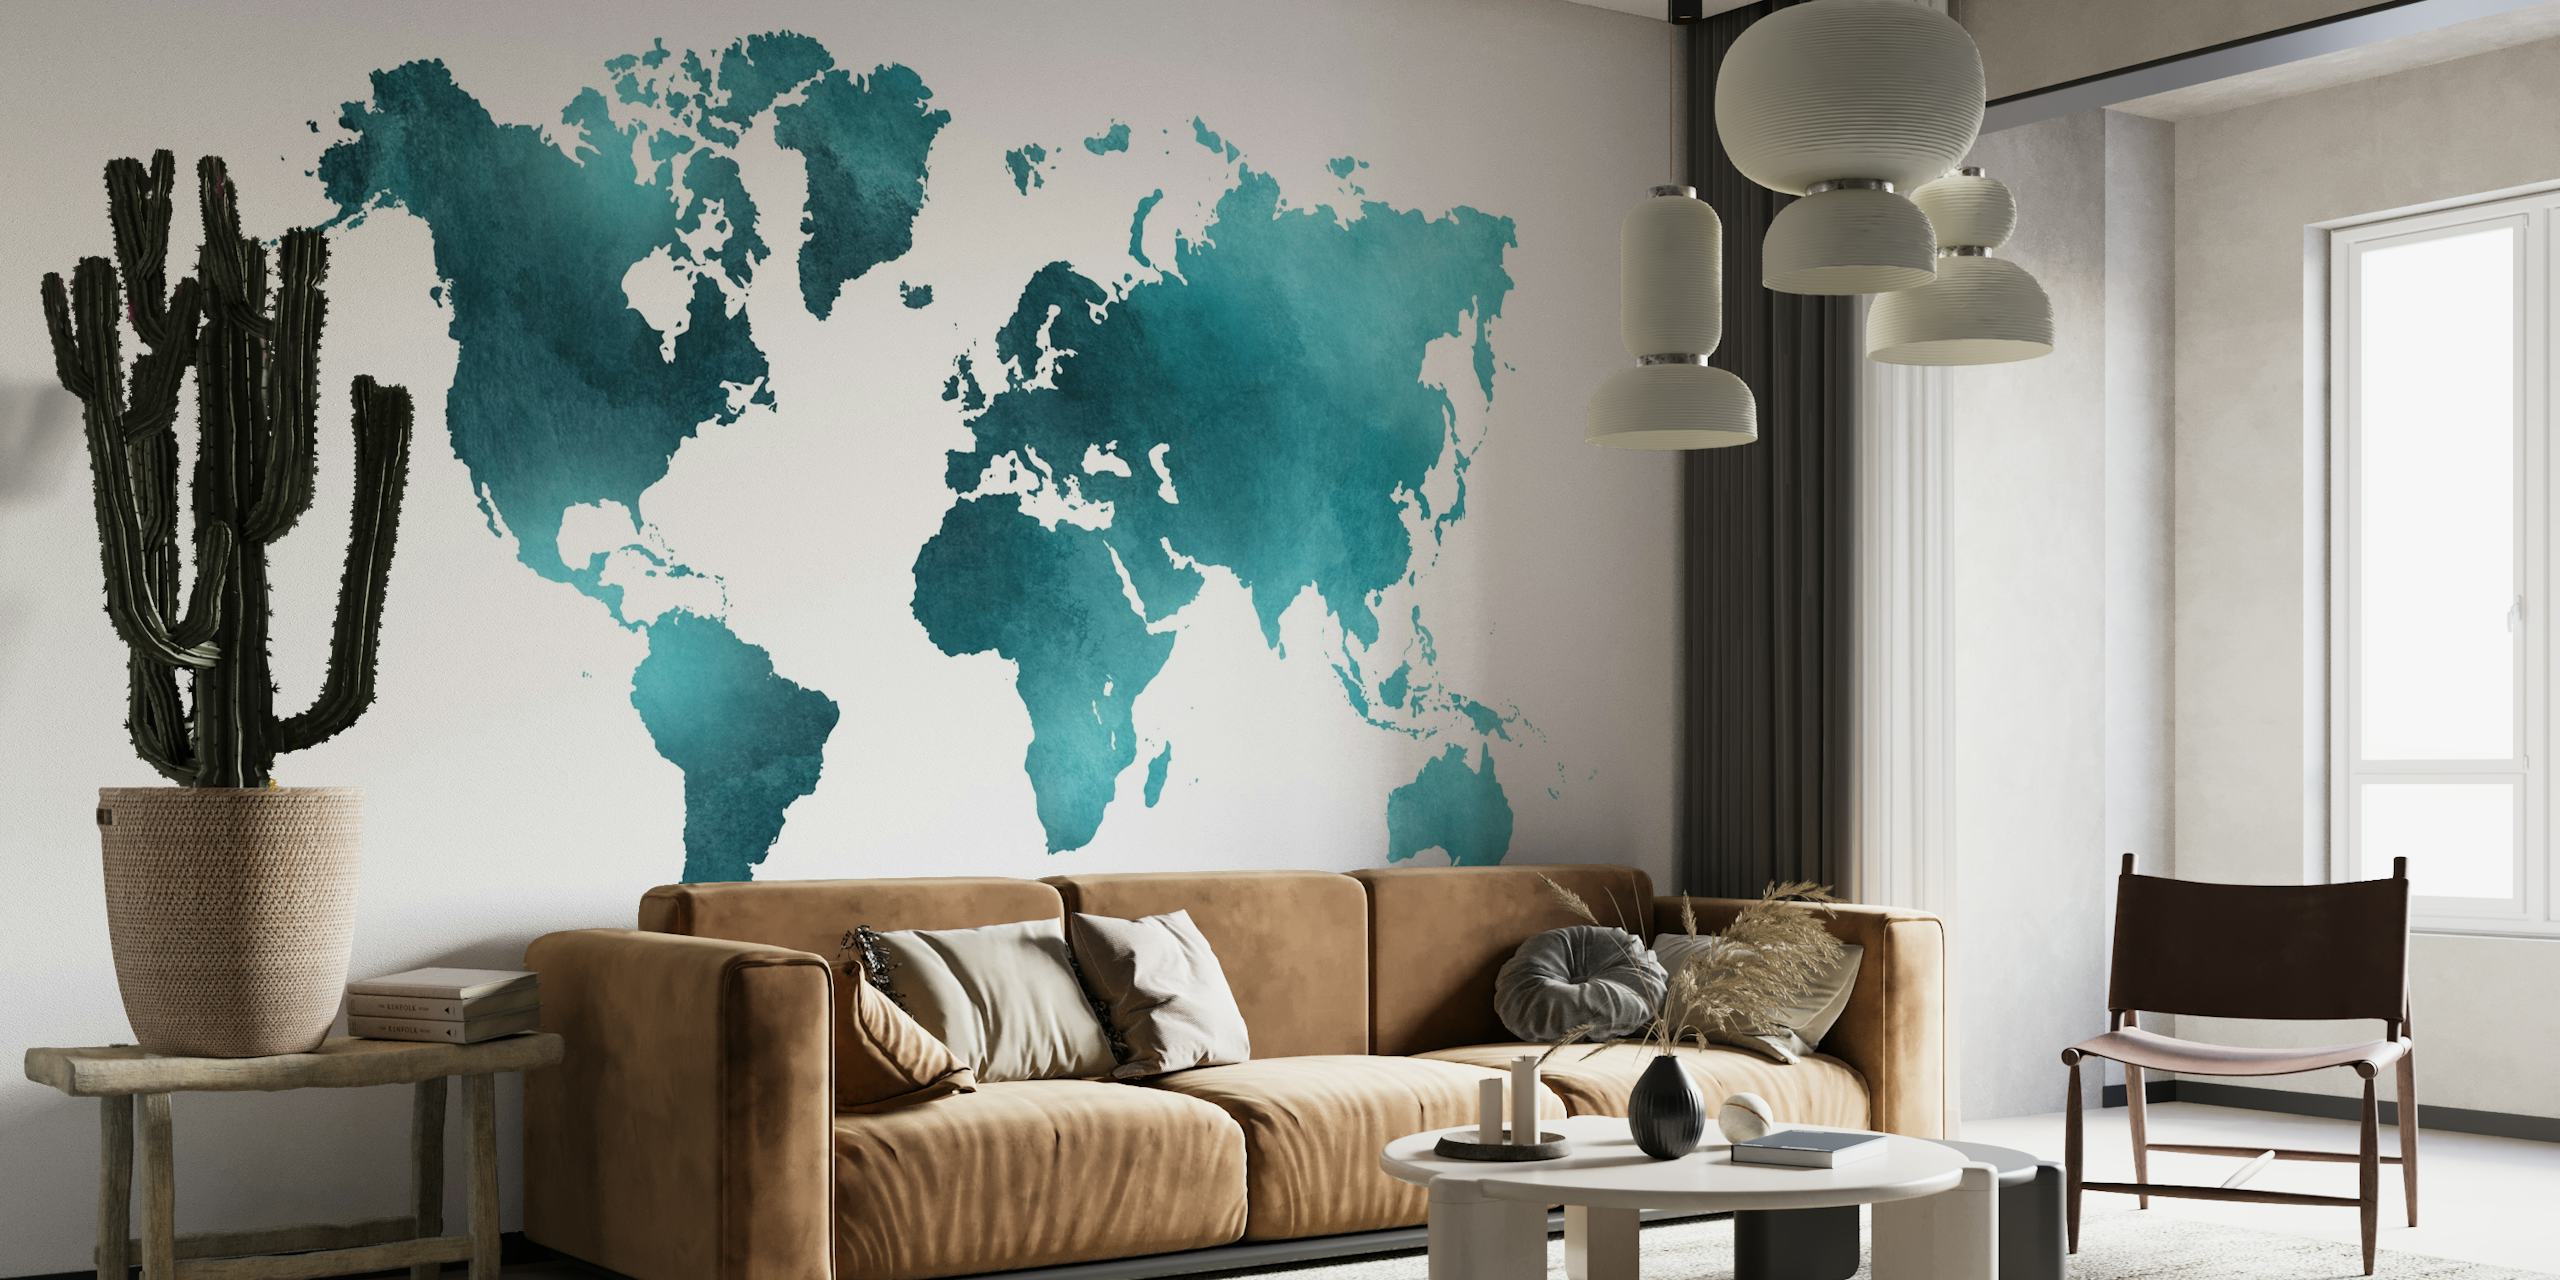 Teal and turquoise world map wall mural